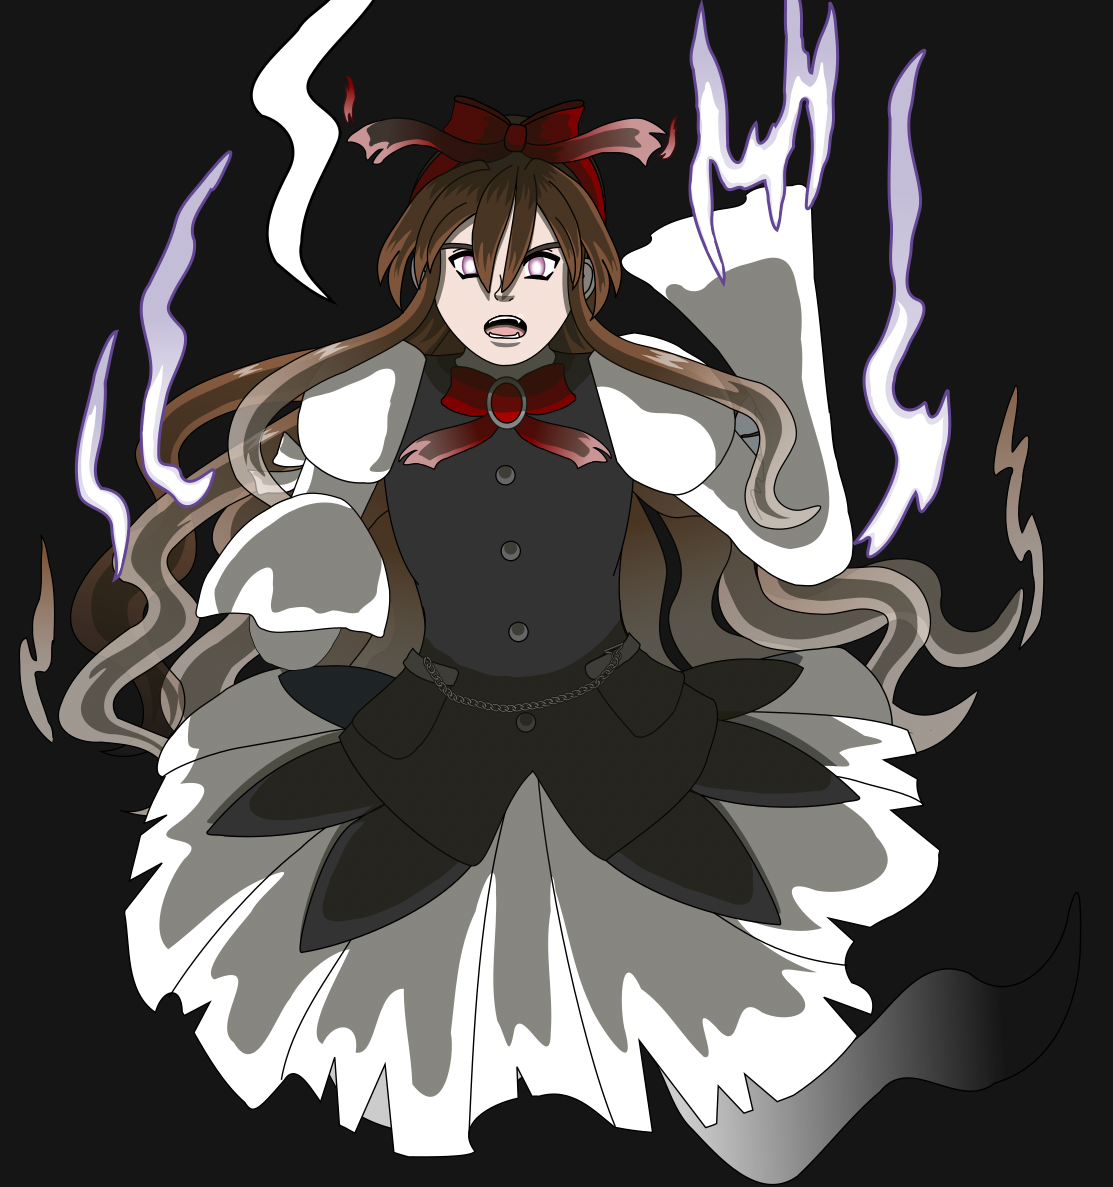 Image description: A ghostly woman with long wavy brown hair that fades to a translucent gray wears a white dress with a black vest and red bows. She has her left hand raised and purple ghostly energy rises from her hand and around her. Her eyes are pink-purple and glow brightly and she has an ominous expression.